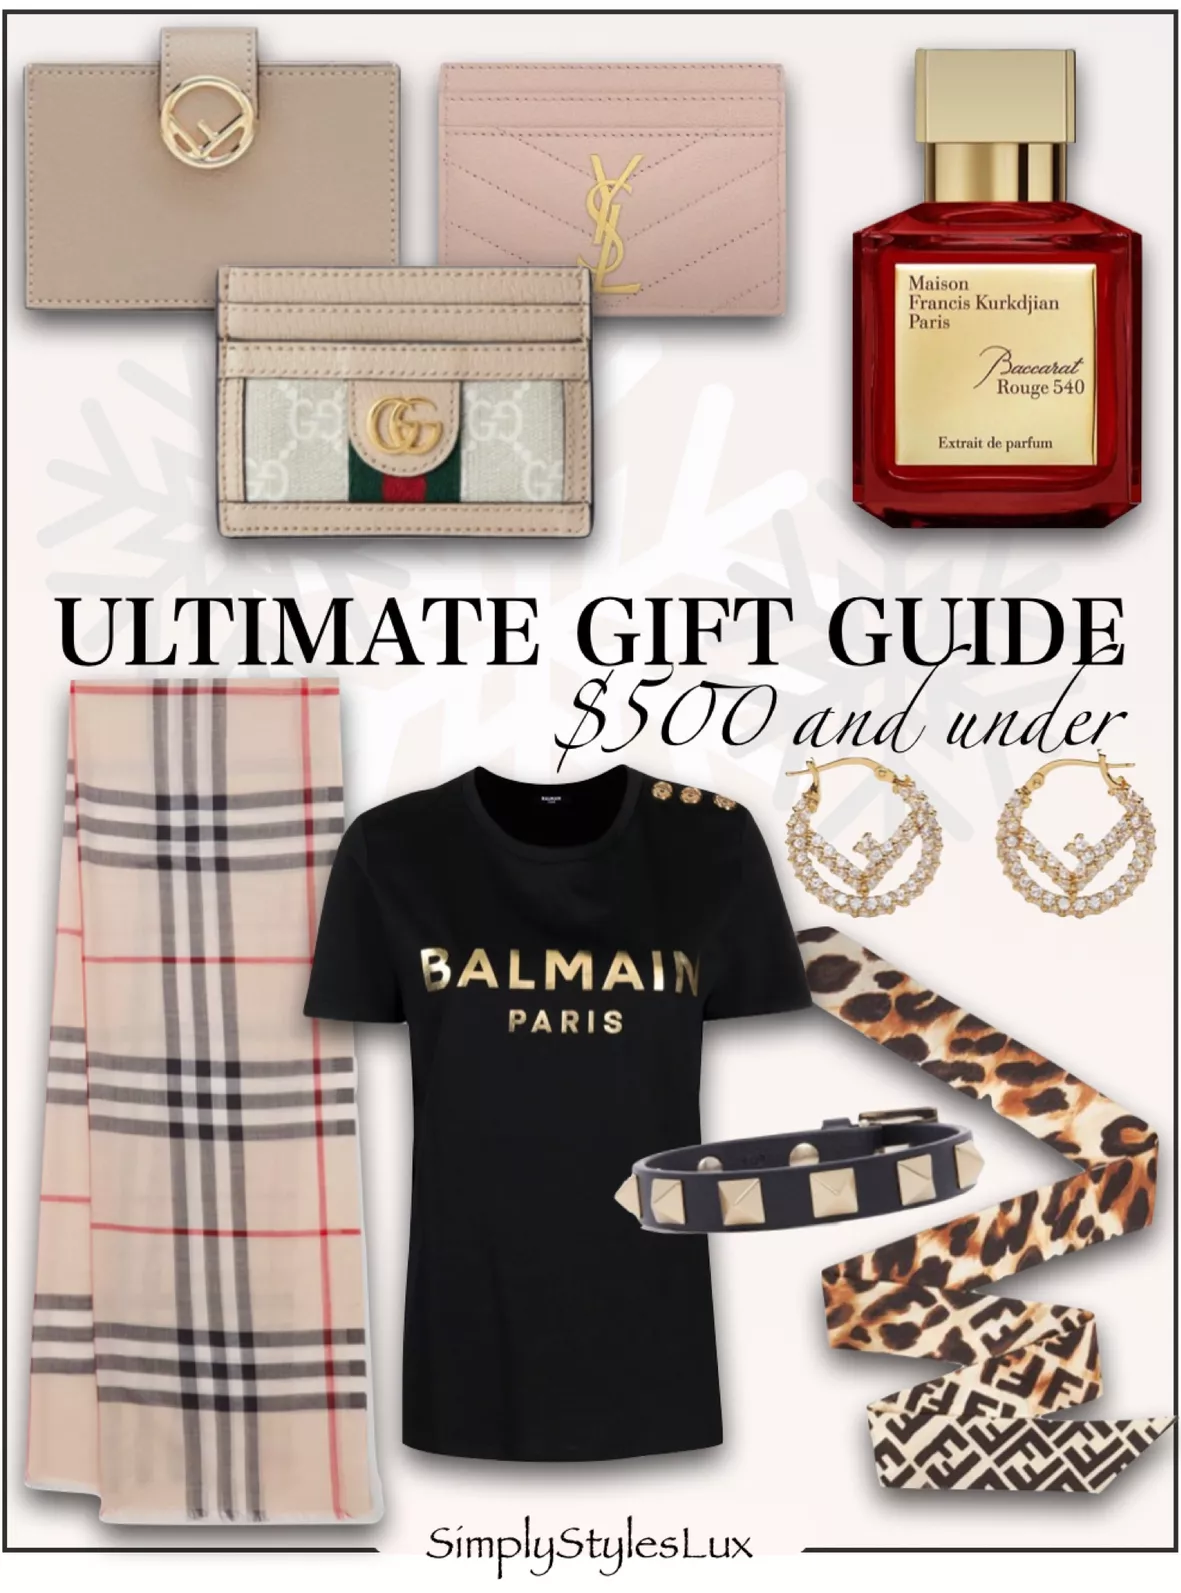 LOUIS VUITTON GIFT GUIDE FOR HER UNDER $500